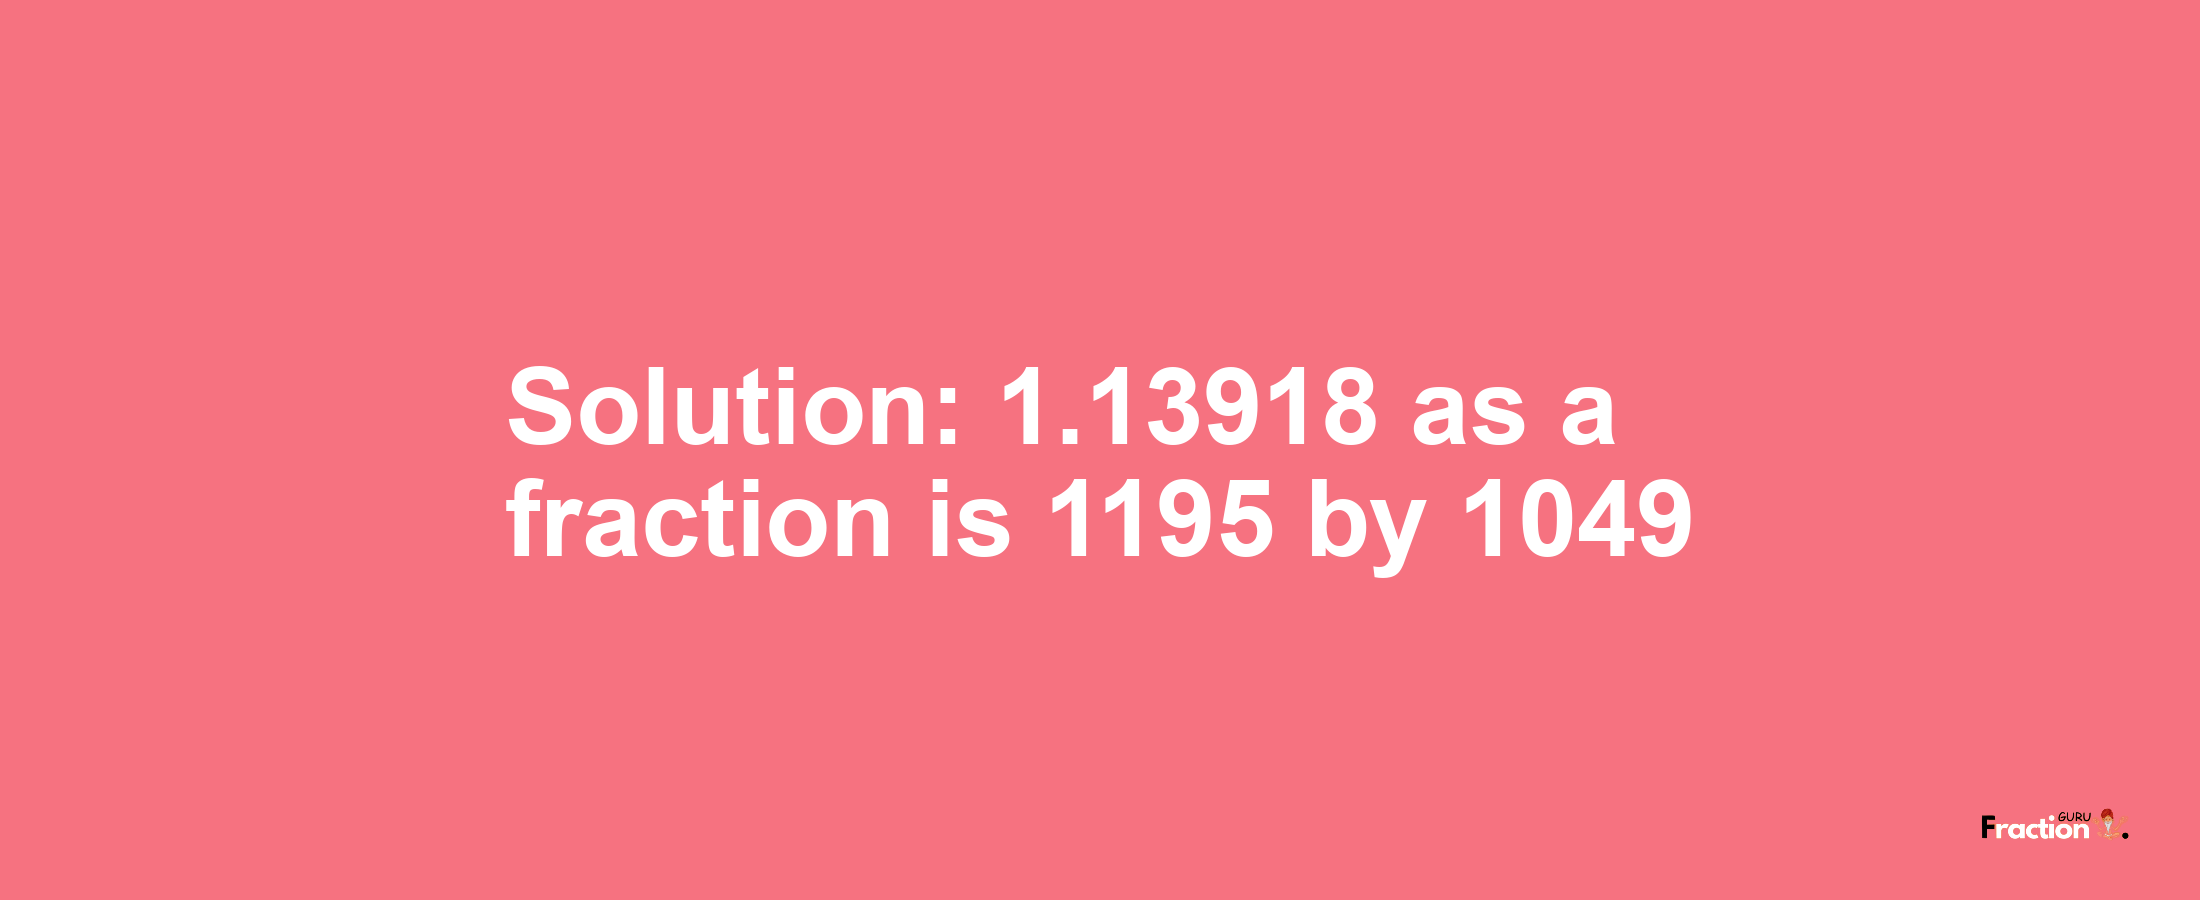 Solution:1.13918 as a fraction is 1195/1049